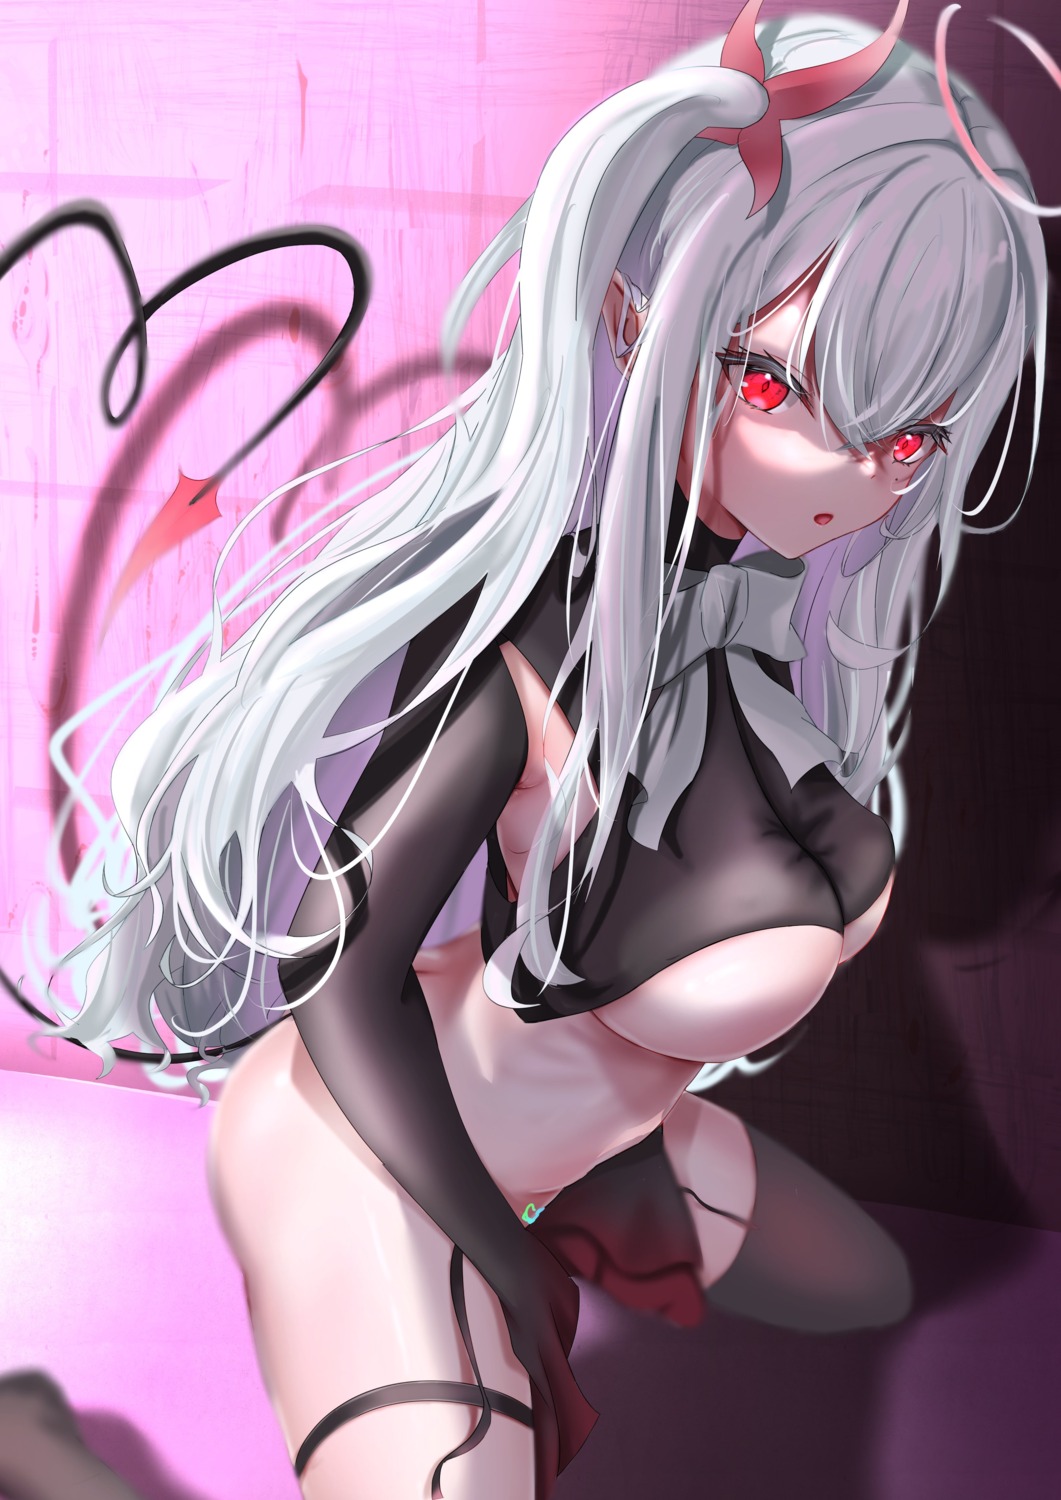 bottomless garter no_bra pointy_ears see_through stockings tail tattoo thighhighs torte underboob